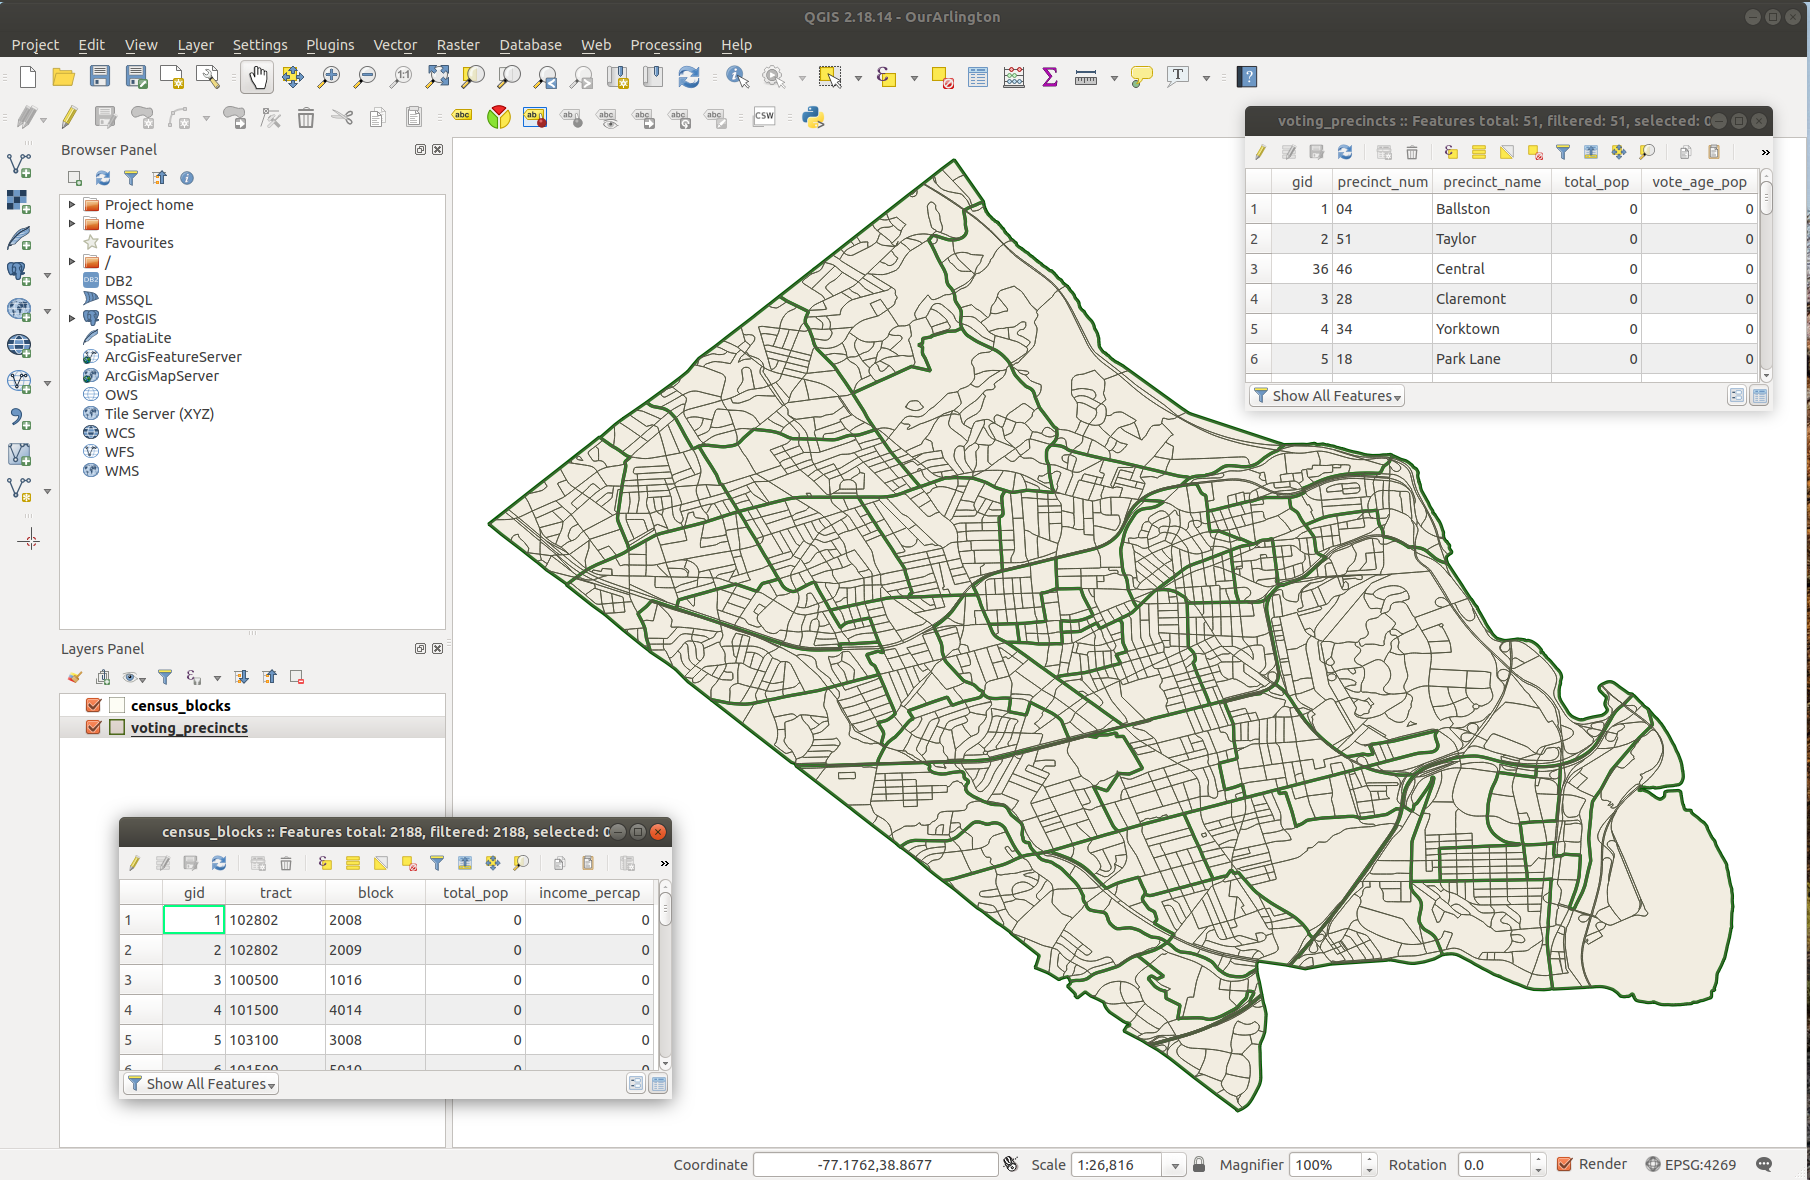 QGIS with census_blocks and voting_precints including attribute tables